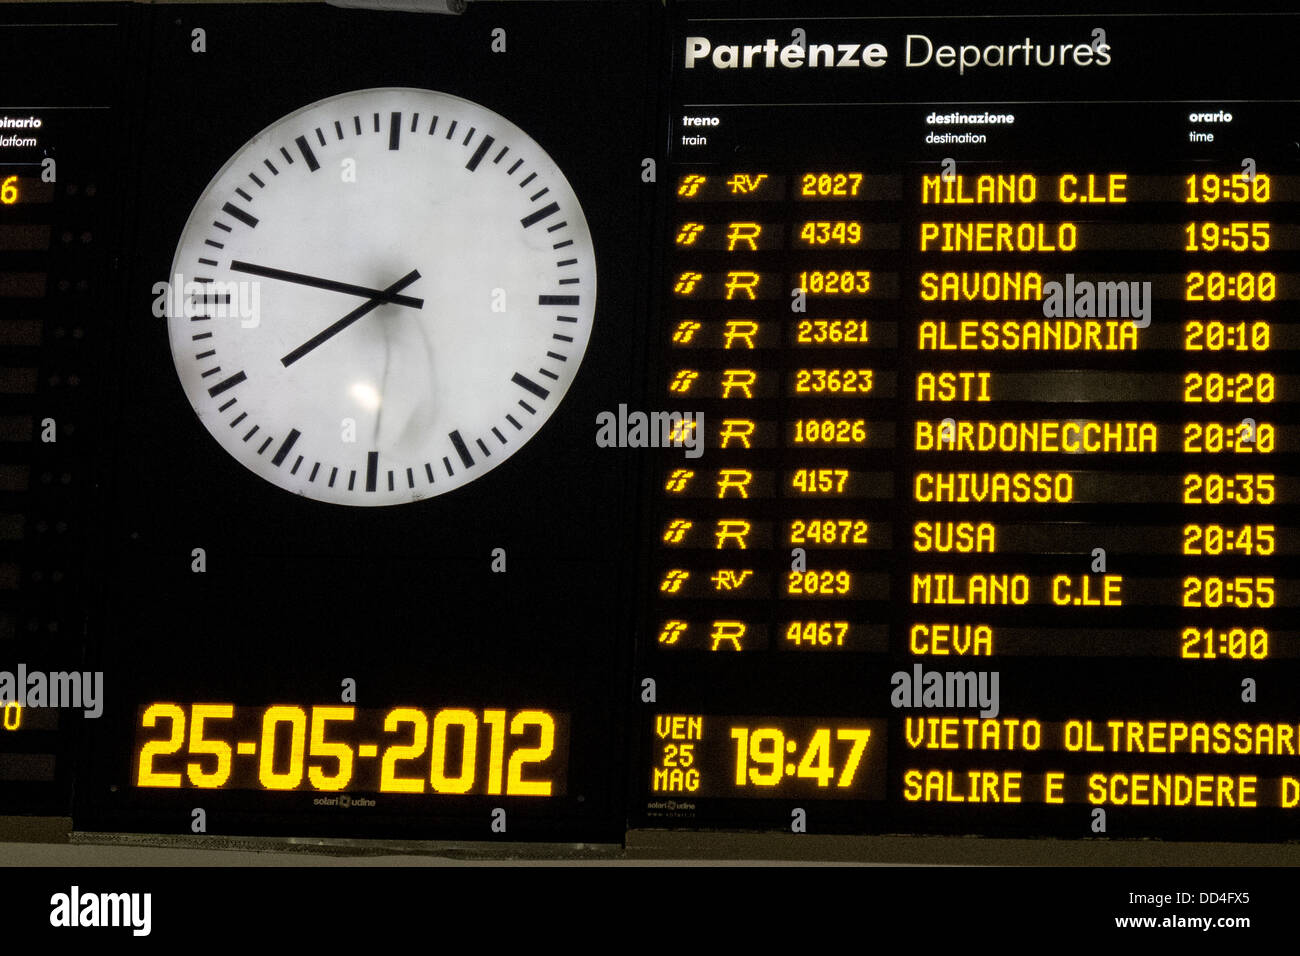 The departure board at Florence railway station. Stock Photo